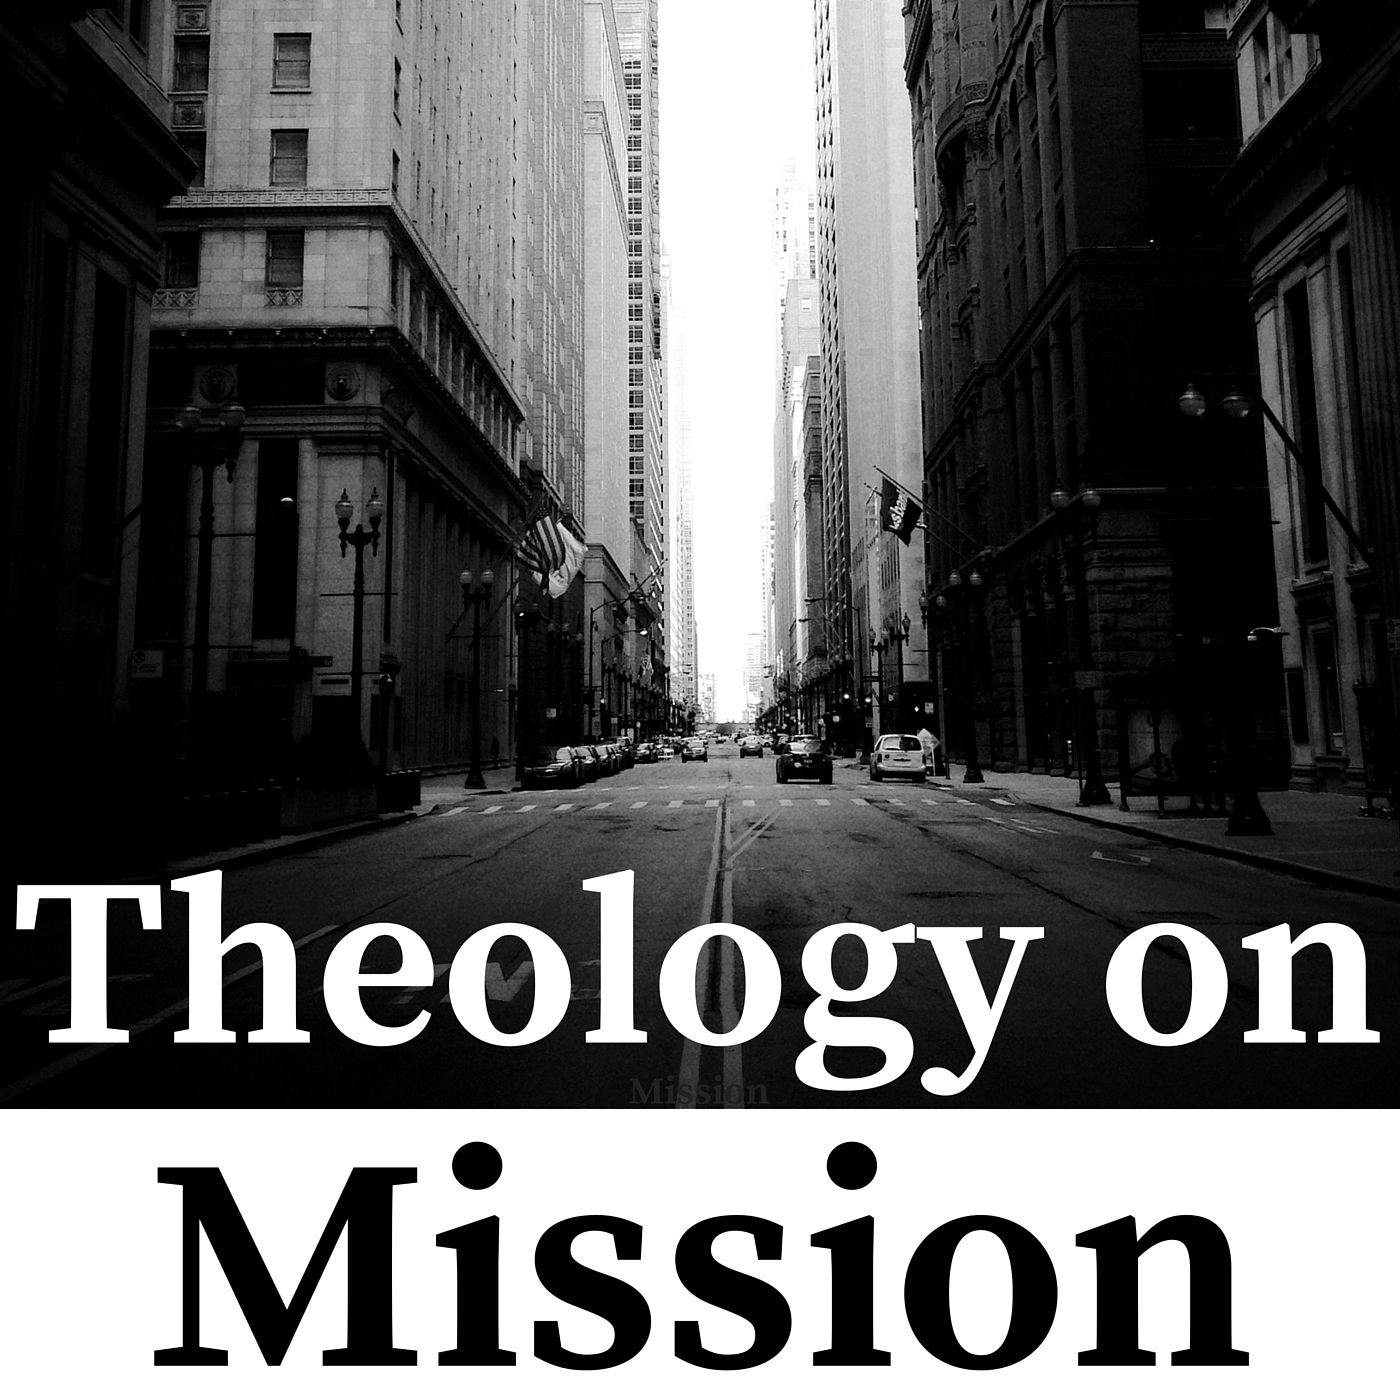 contacts-reach-demographics-for-theology-on-mission-podchaser